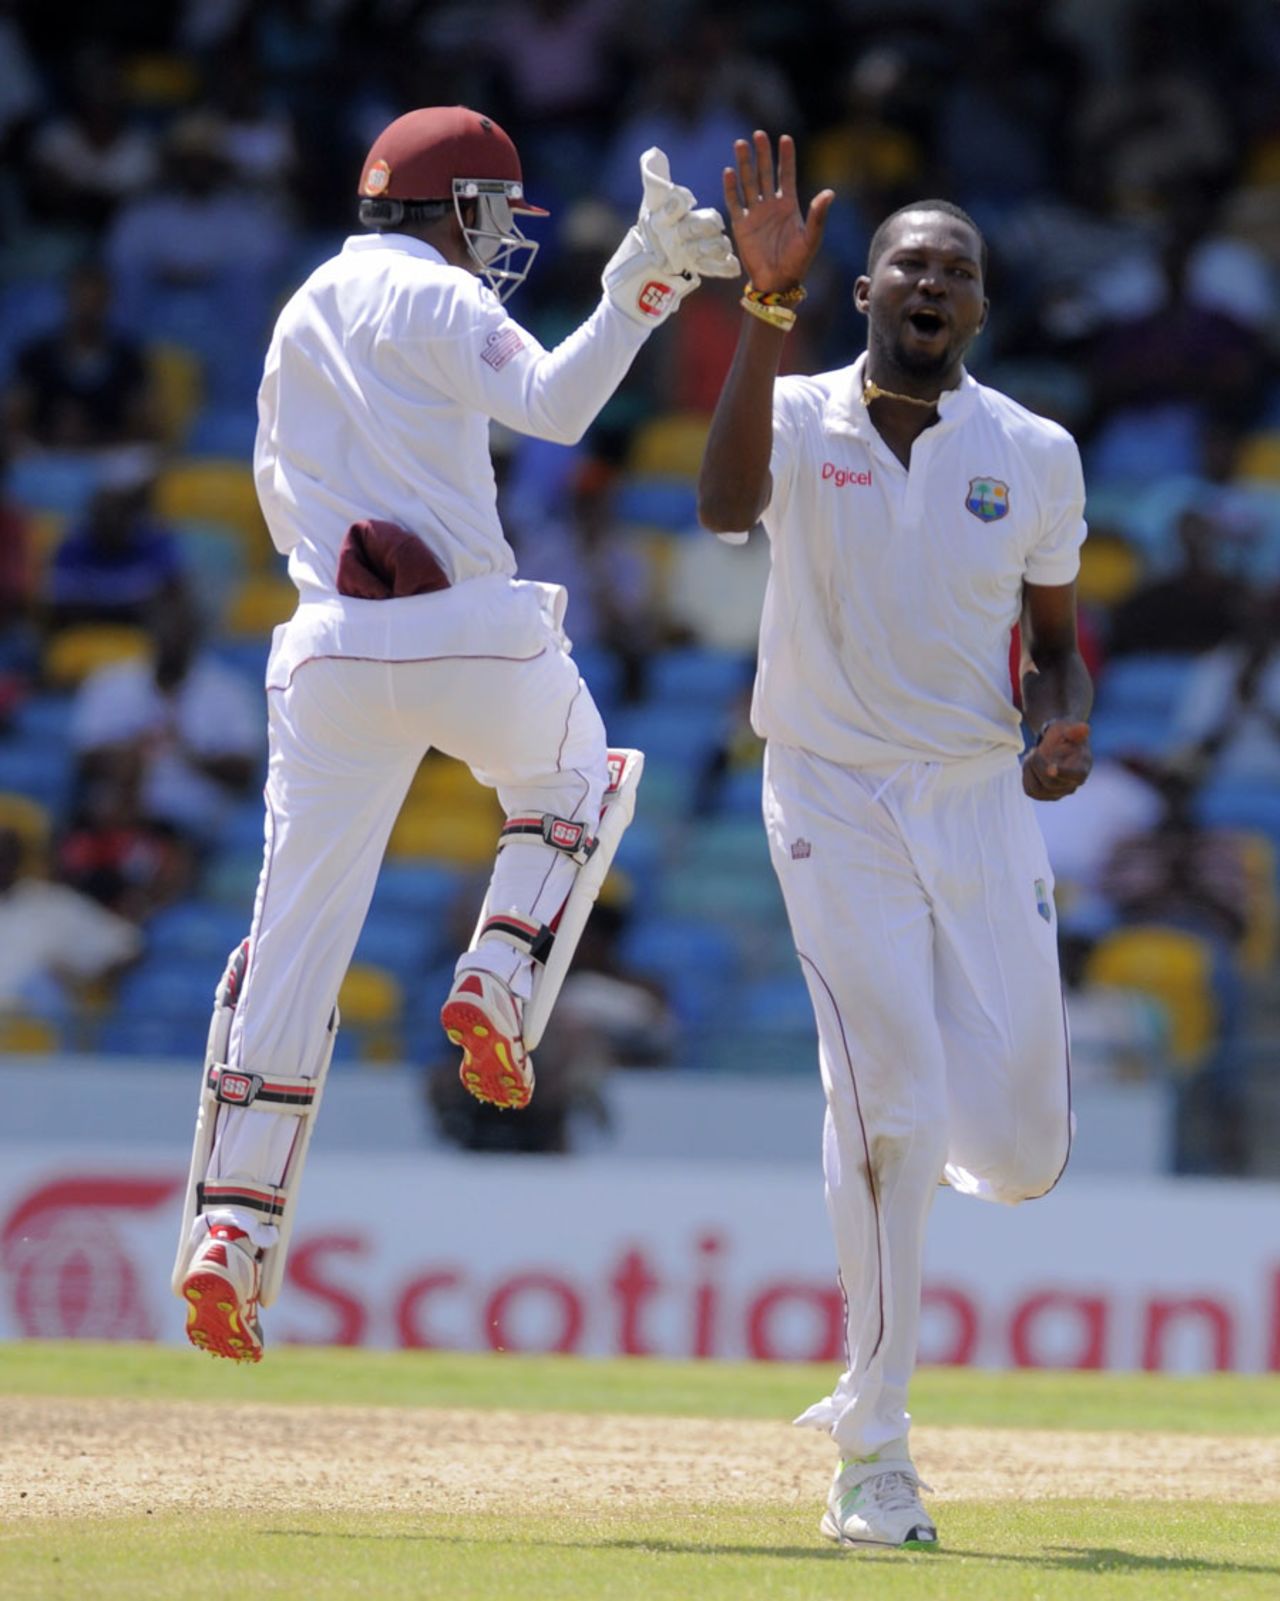 Sulieman Benn picked up a five-wicket haul, West Indies v New Zealand, 3rd Test, Barbados, 1st day, June 26, 2014